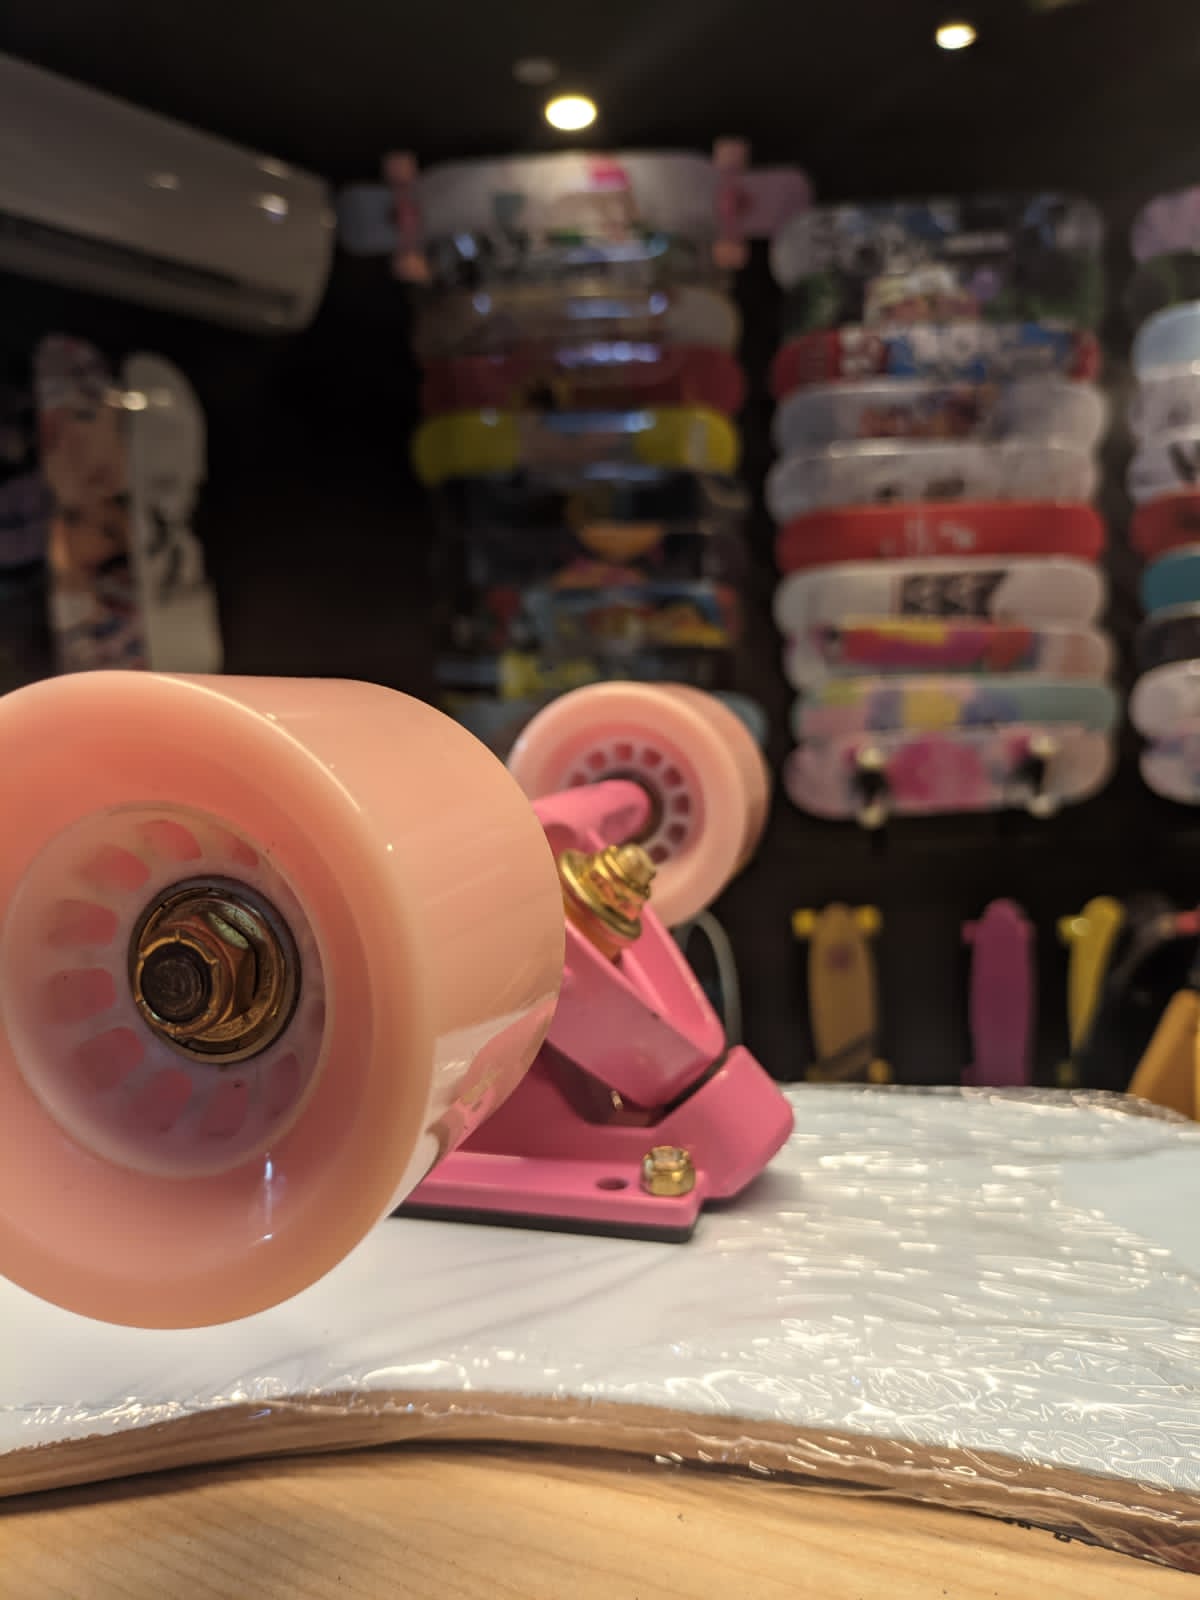 The 50mm PU 78A wheels deliver a buttery-smooth ride, while the ABEC-9 precision bearings ensure that the board rolls effortlessly.